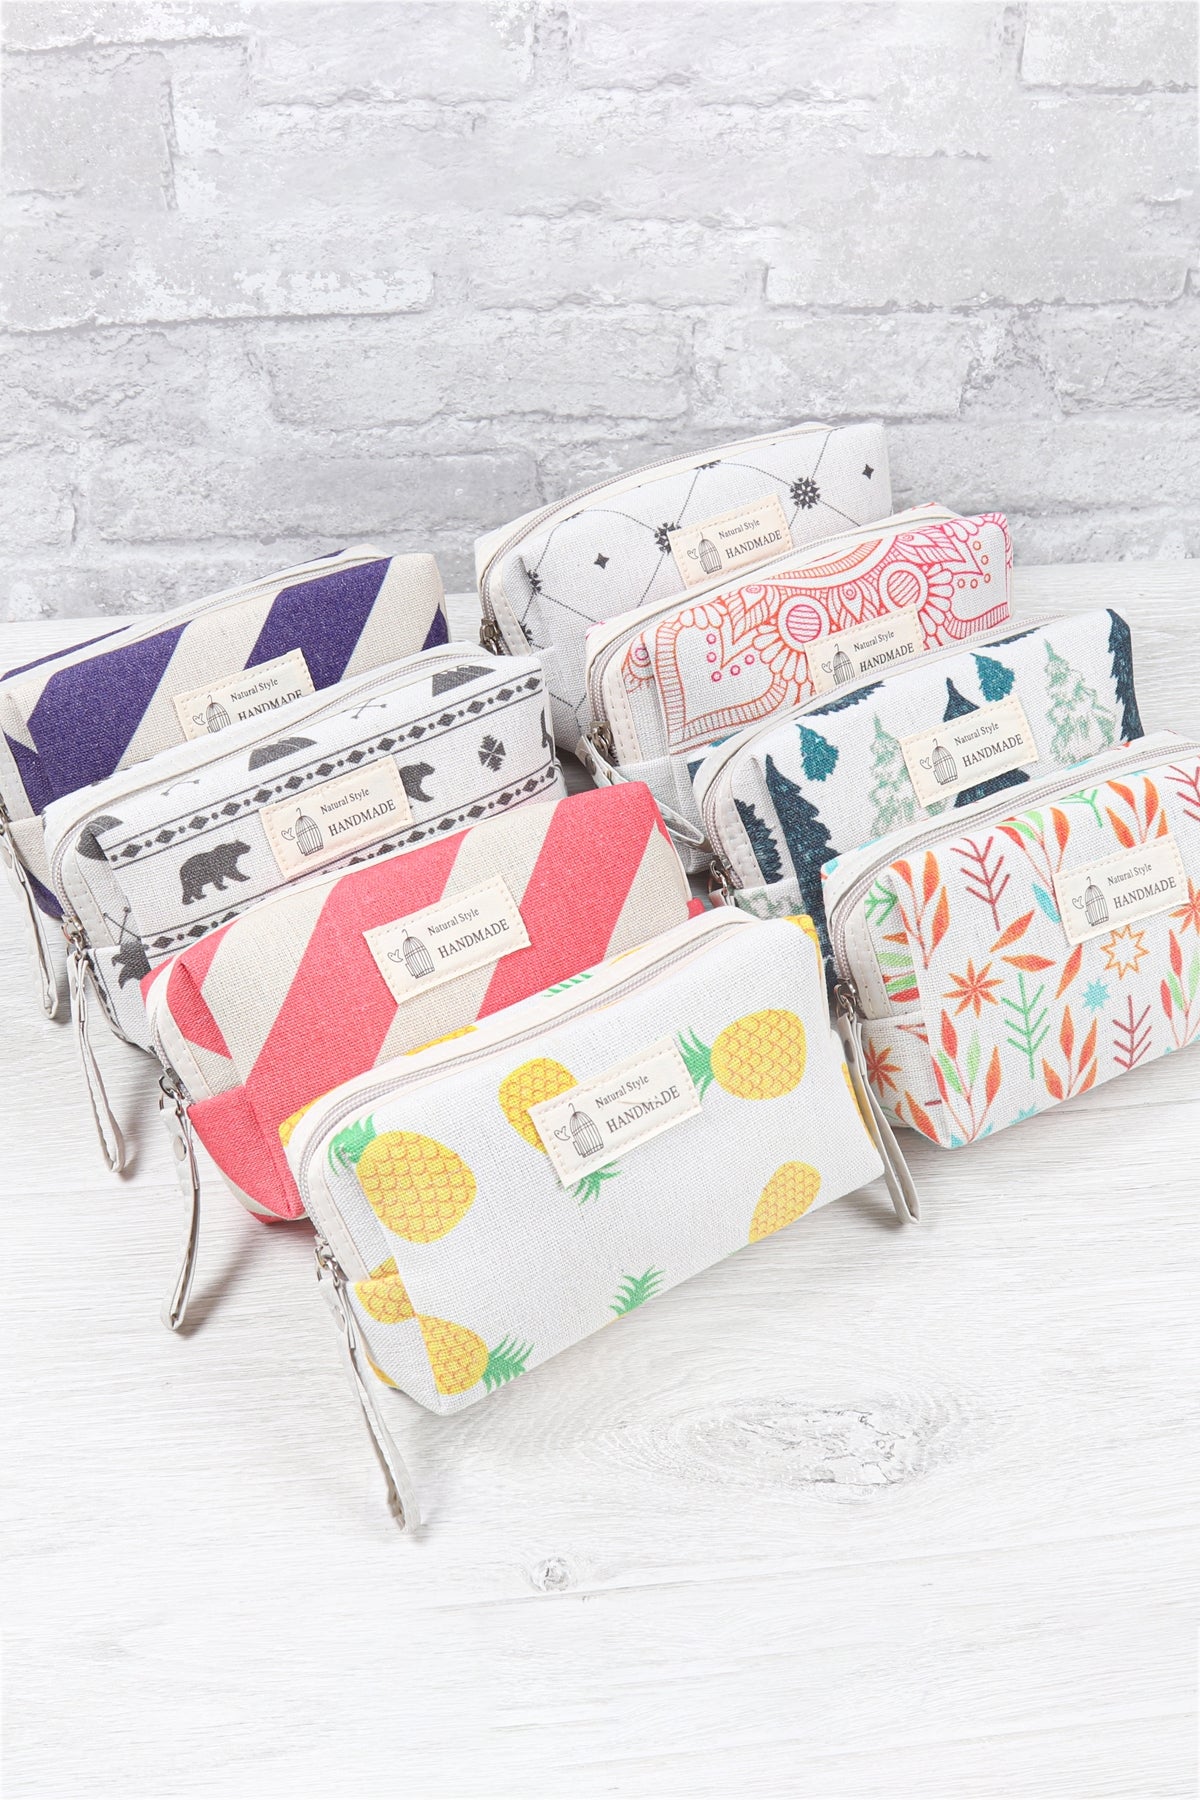 6 STYLE 6 STRIPE VIOLET PRINT COSMETIC BAG/6PCS (NOW $1.50 ONLY!)